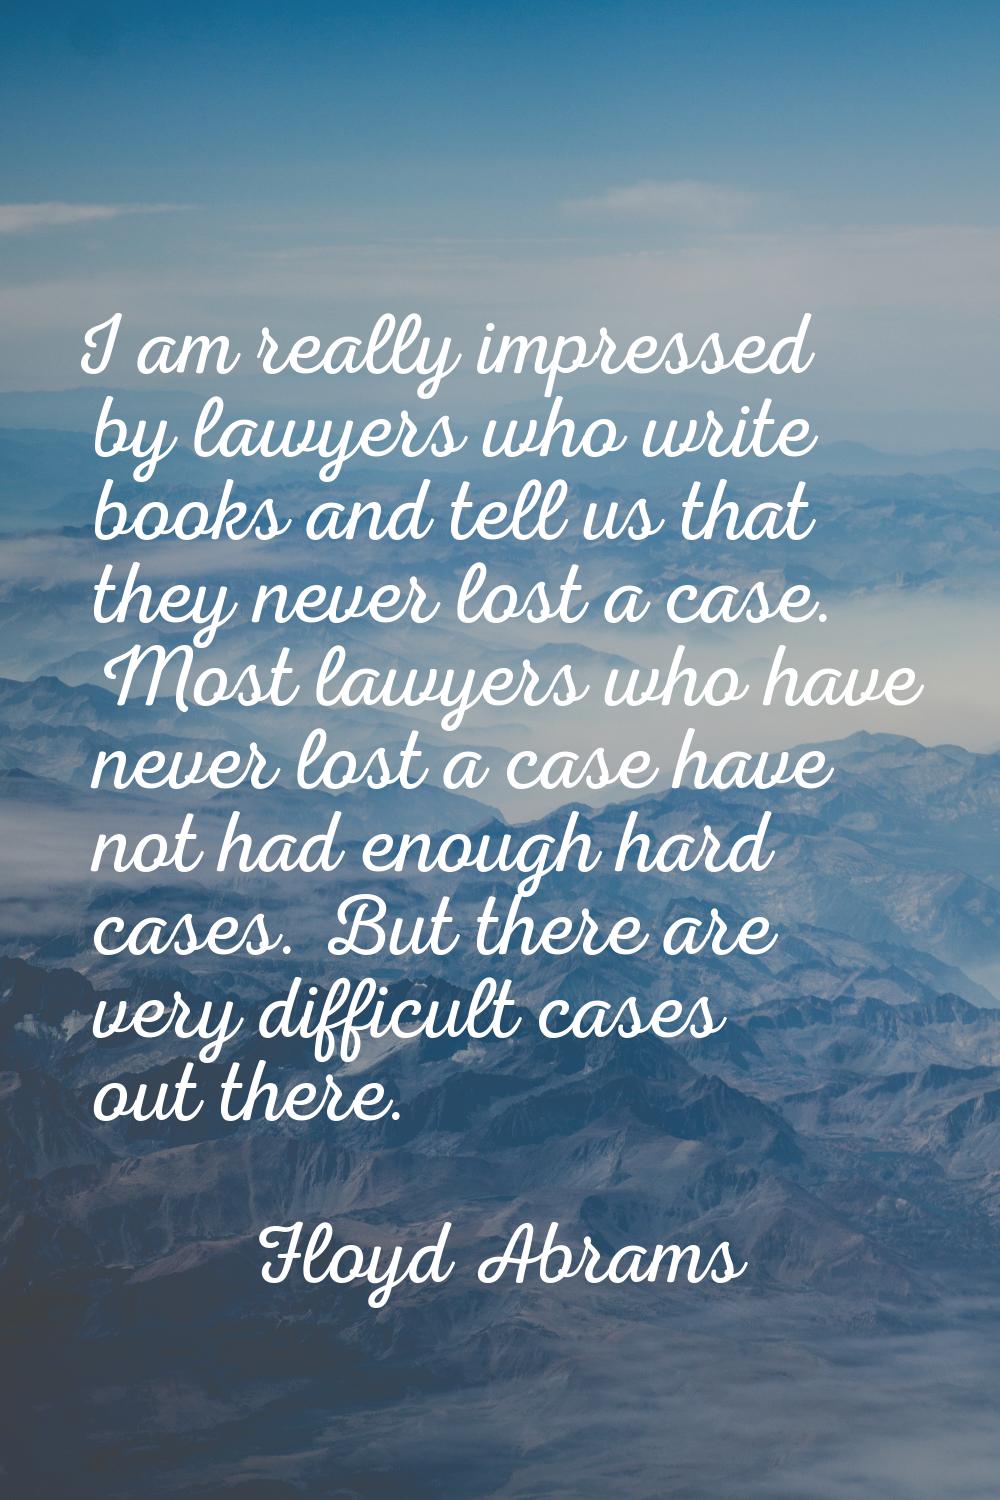 I am really impressed by lawyers who write books and tell us that they never lost a case. Most lawy